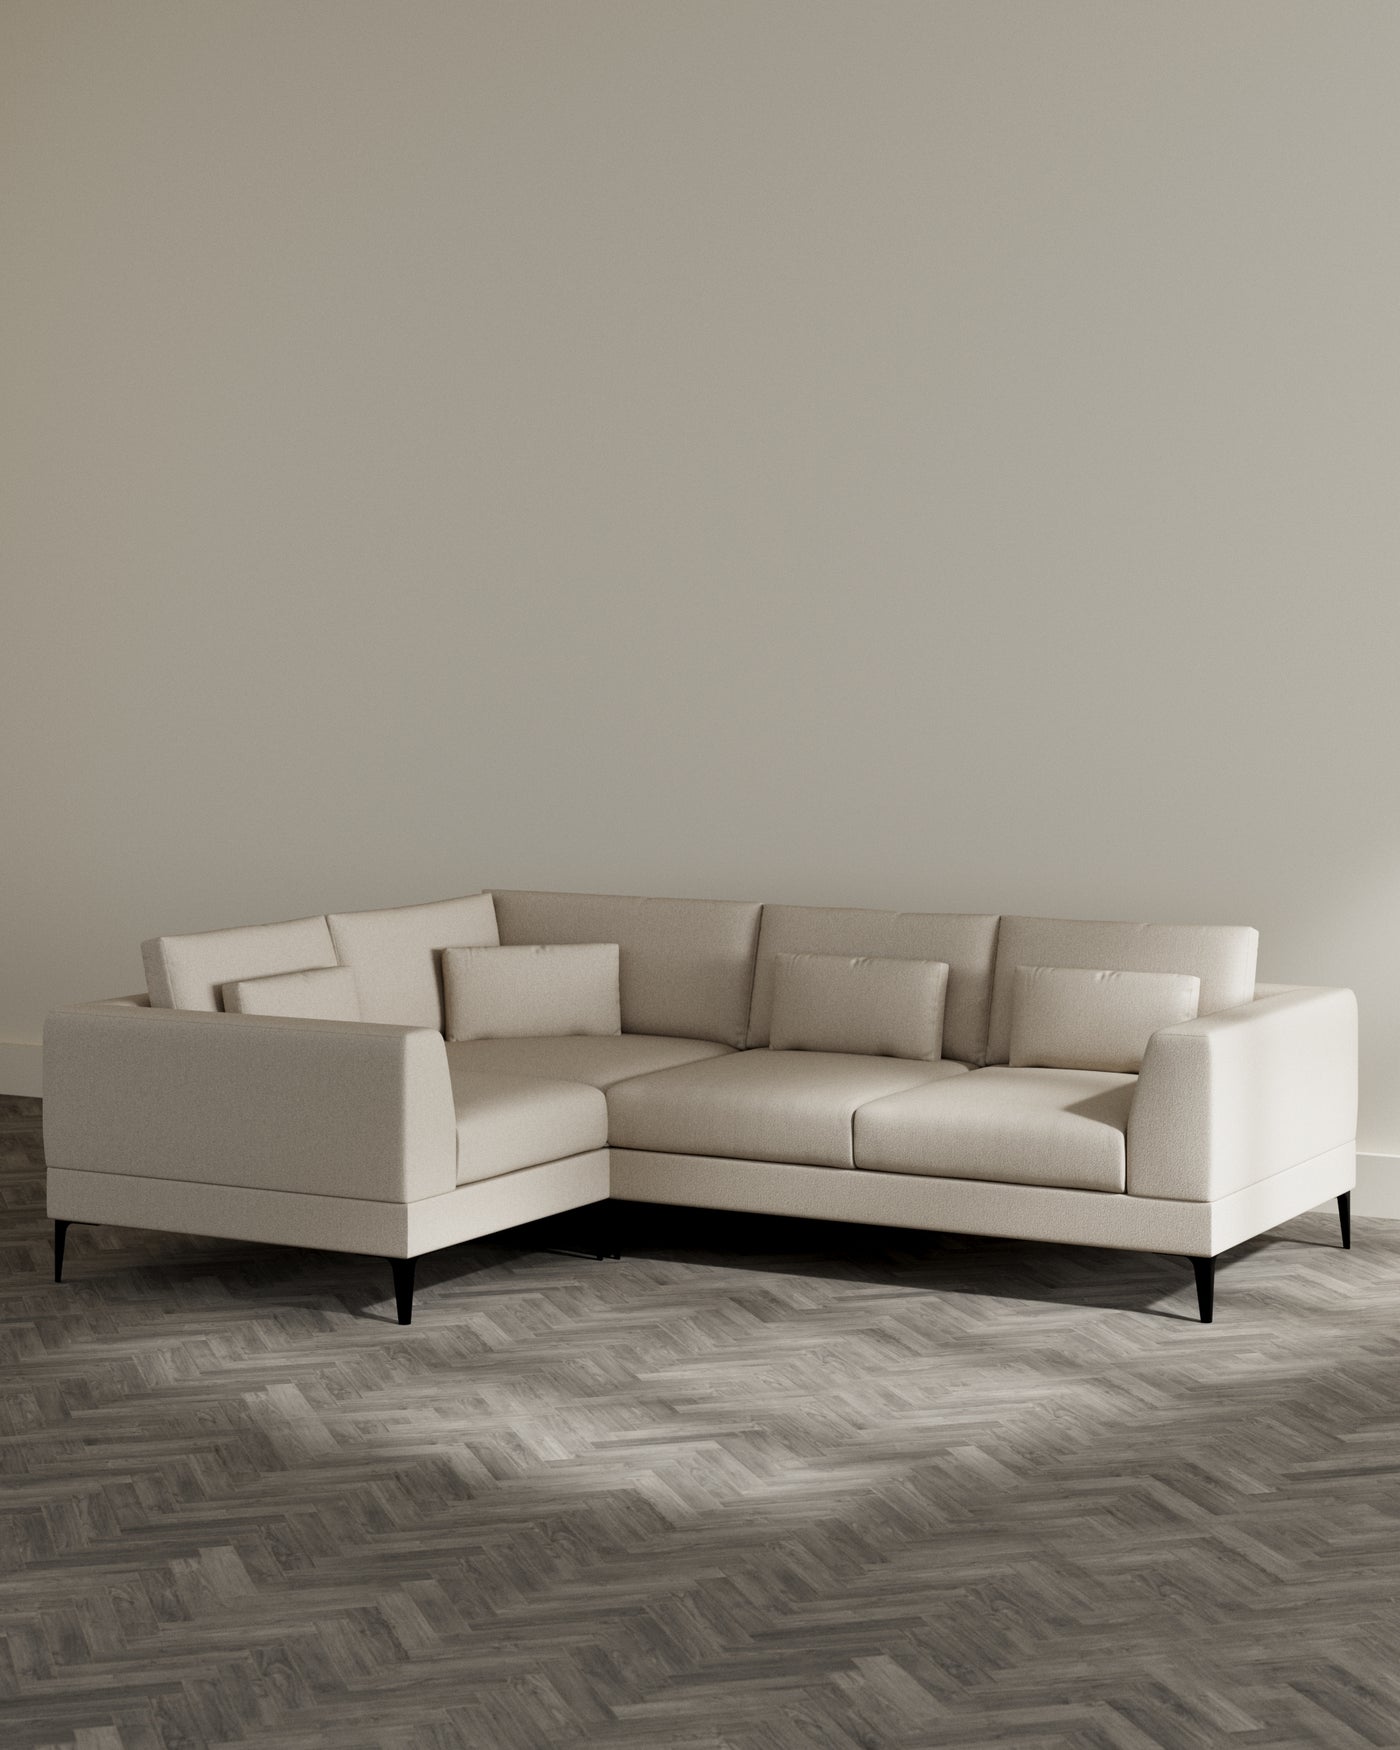 An elegant beige corner sectional sofa with a clean, contemporary design, featuring plush back cushions and a chaise lounge extension. The sofa has a subtly textured fabric upholstery and is supported by sleek, tapered wooden legs in a dark finish.